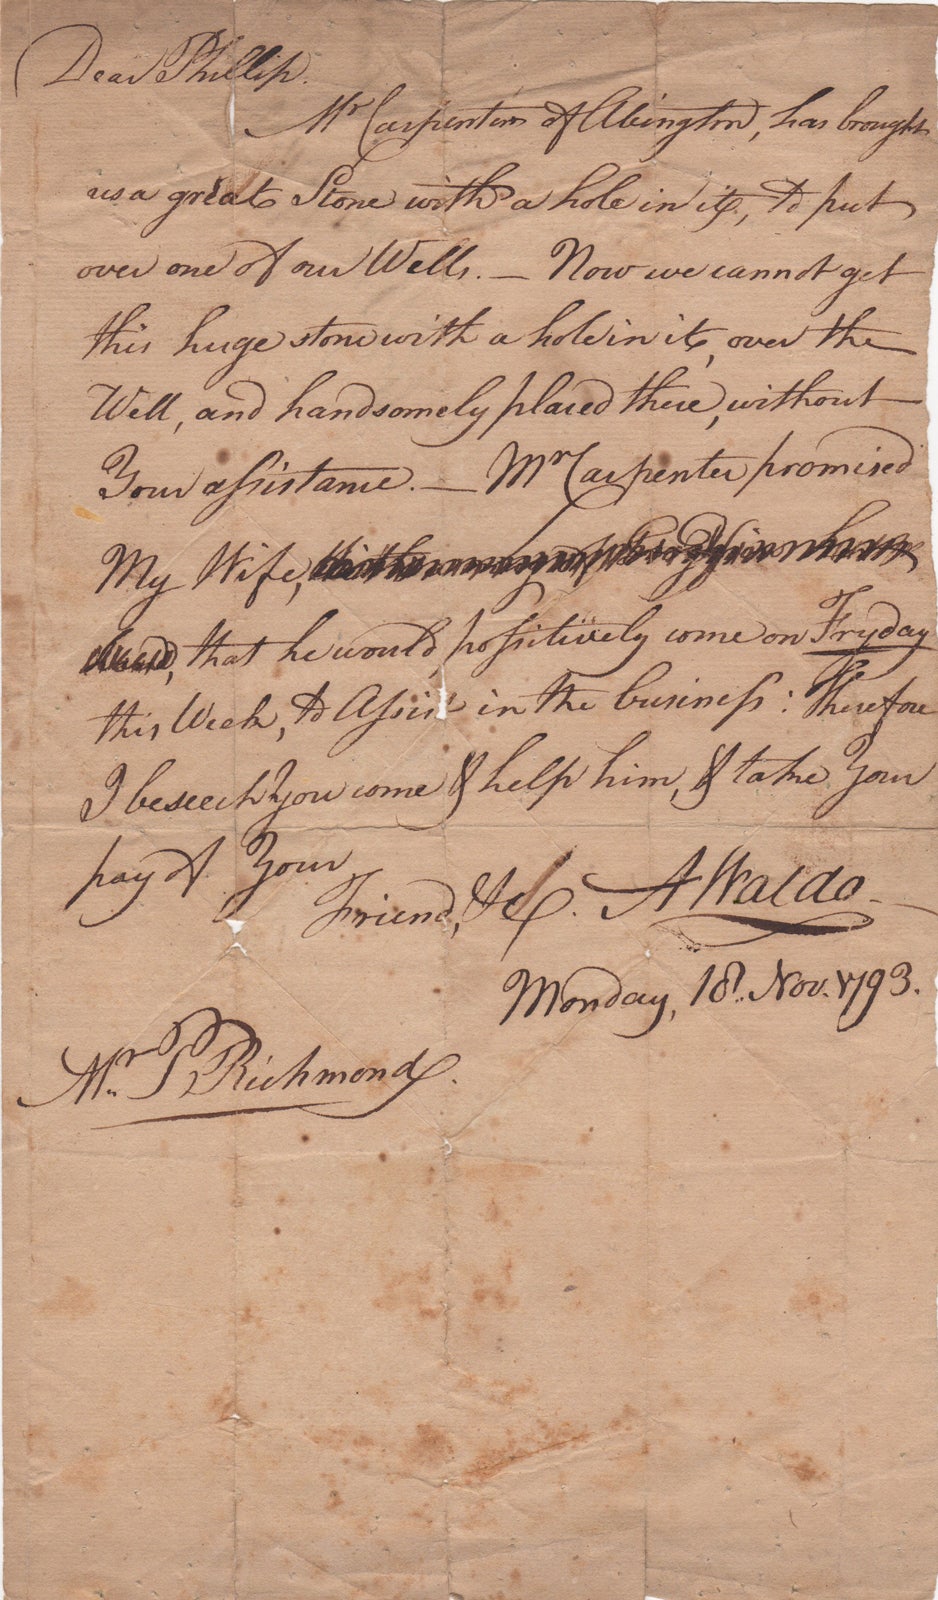 [Connecticut] Waldo, A. [Albigence] - [Als] Surgeon General of the Revolutionary Army Who Recorded His Sufferings at Valley Forge Needs Help with His Well